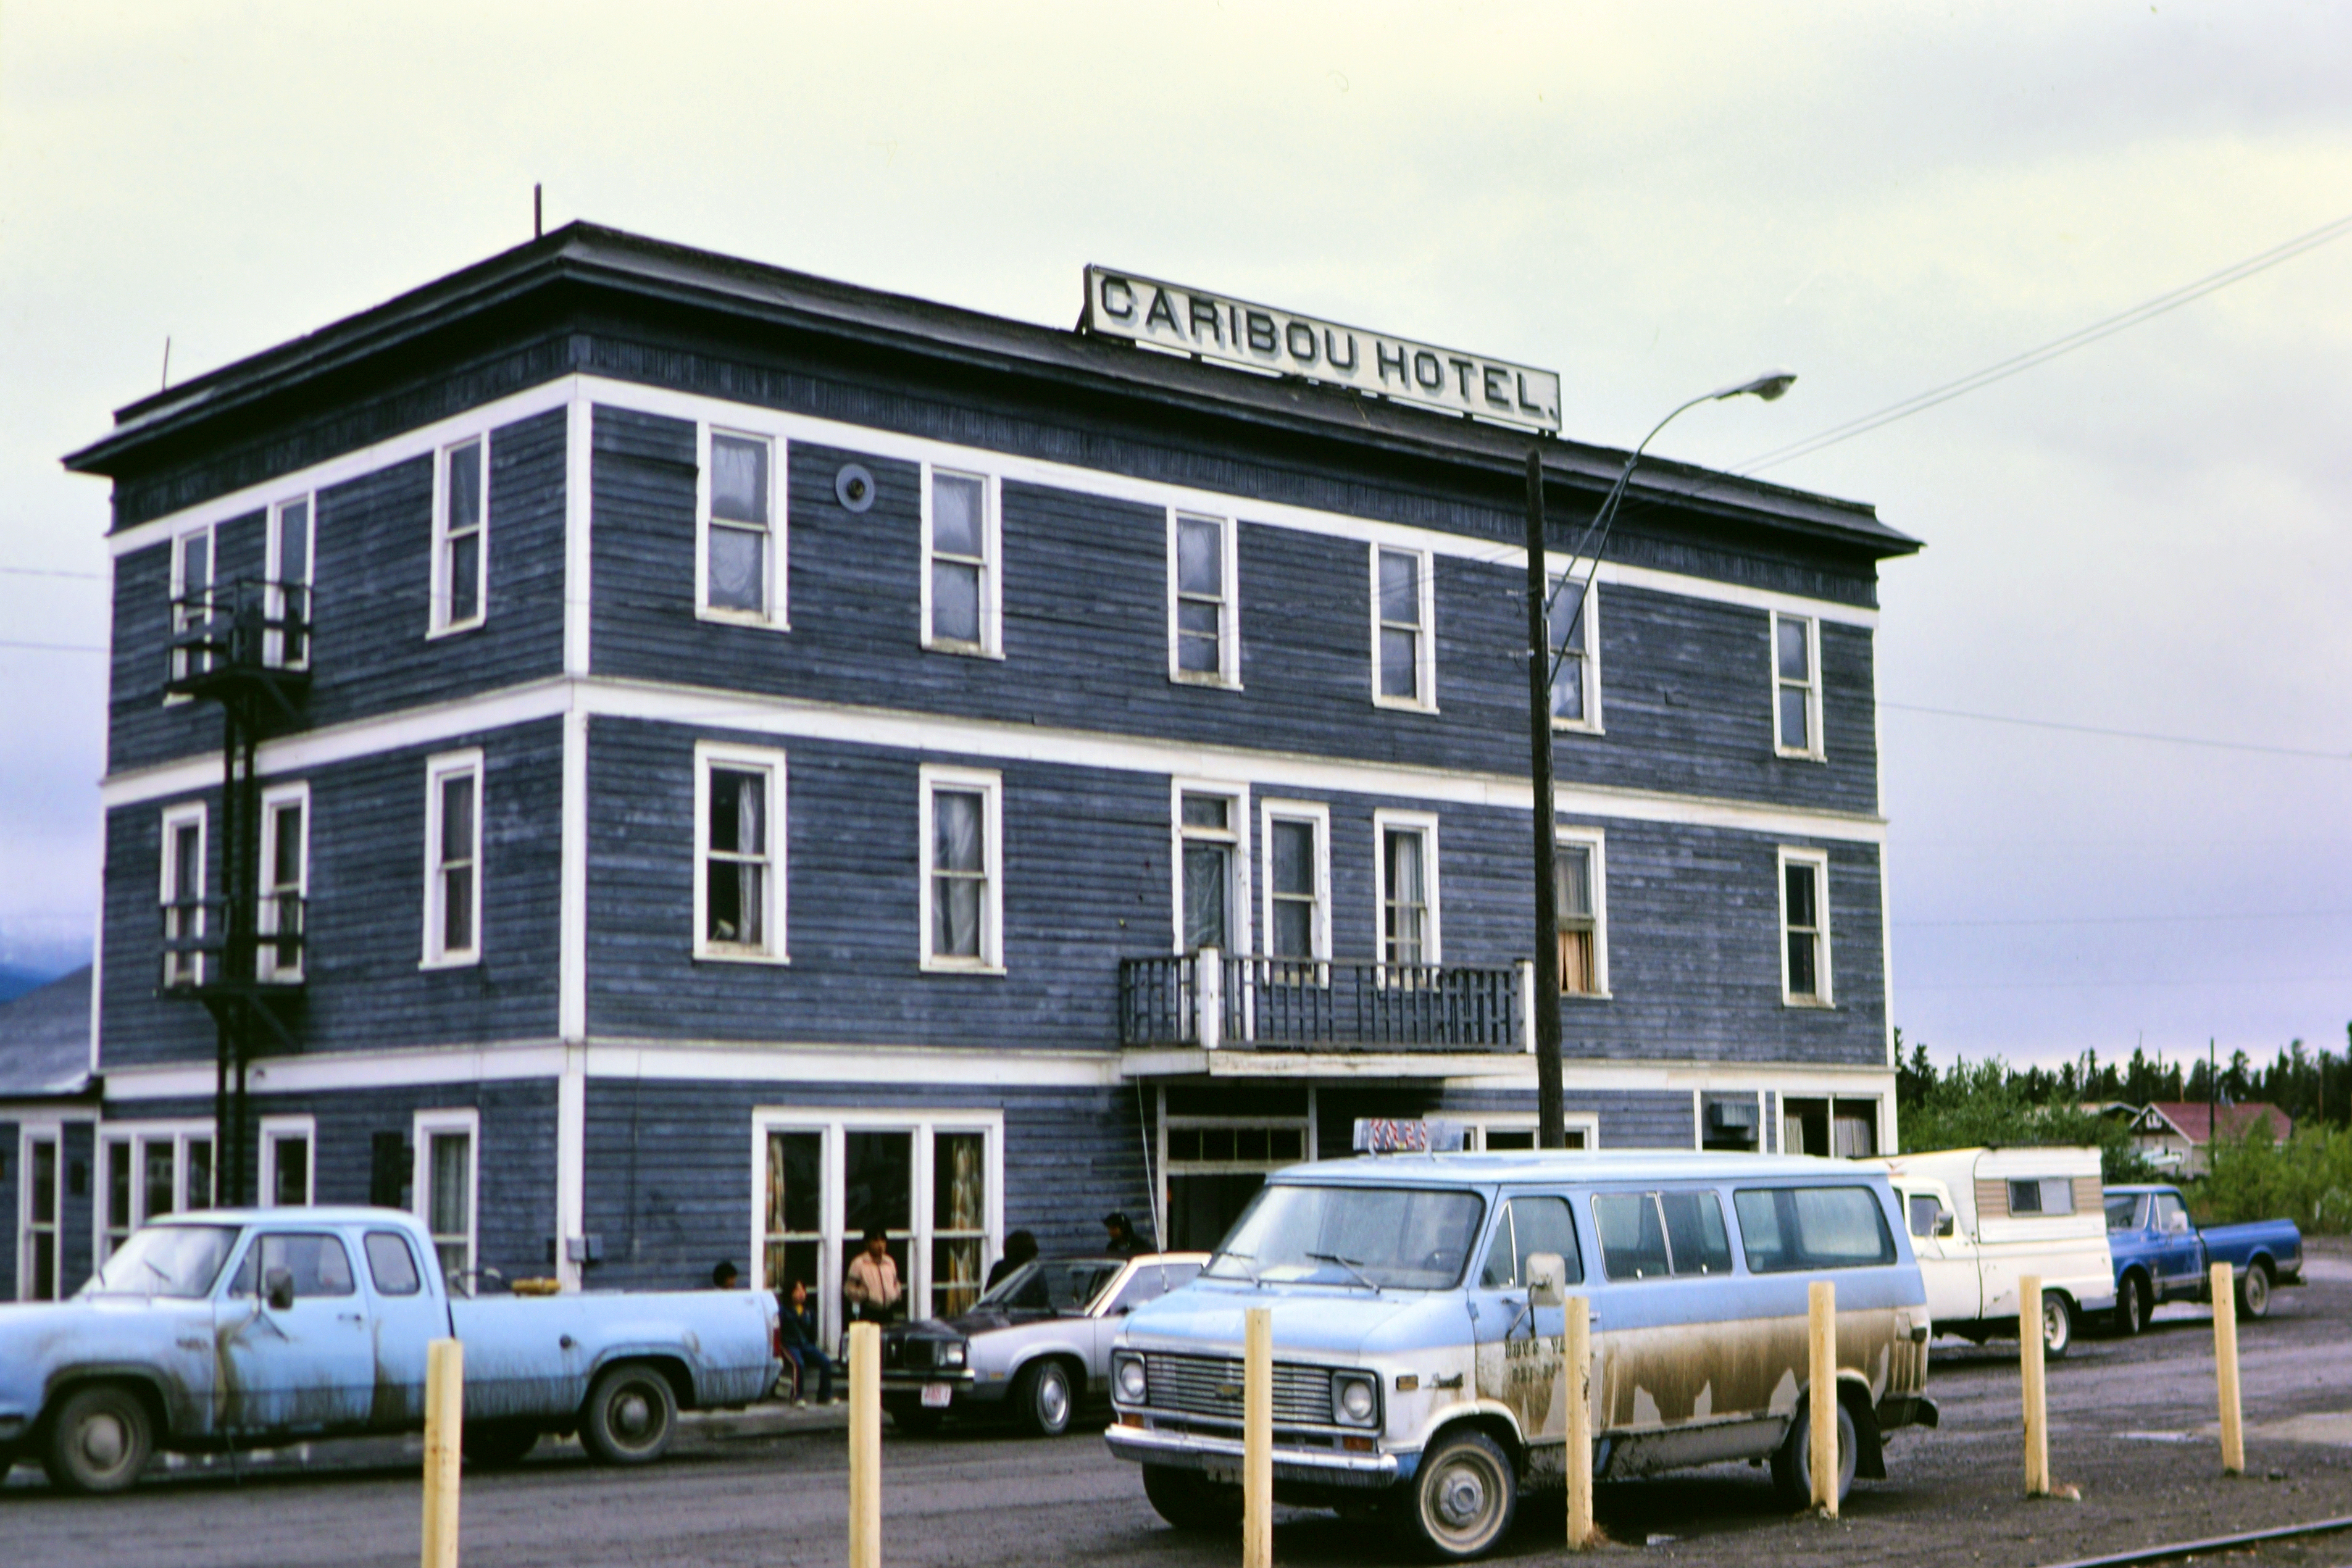 The Caribou Hotel in 1983 is surrounded by trucks and vans.